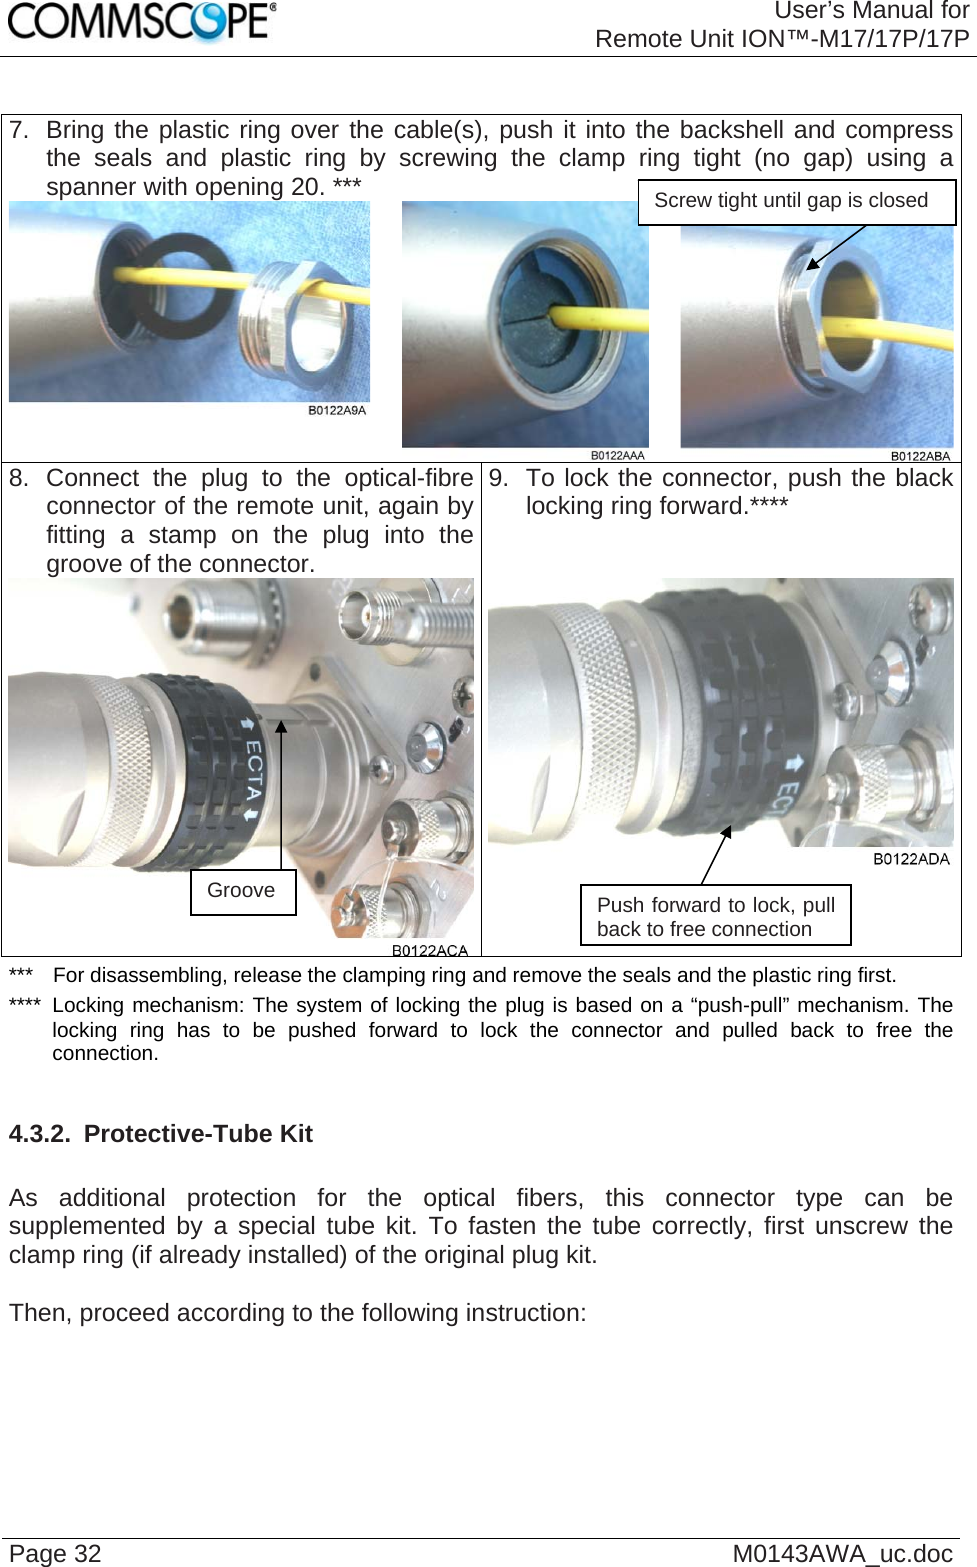 User’s Manual forRemote Unit ION™-M17/17P/17P Page 32  M0143AWA_uc.doc 7.  Bring the plastic ring over the cable(s), push it into the backshell and compress the seals and plastic ring by screwing the clamp ring tight (no gap) using a spanner with opening 20. ***    Screw tight until gap is closed 8. Connect the plug to the optical-fibre connector of the remote unit, again by fitting a stamp on the plug into the groove of the connector.  9.  To lock the connector, push the black locking ring forward.****  ***  For disassembling, release the clamping ring and remove the seals and the plastic ring first. ****  Locking mechanism: The system of locking the plug is based on a “push-pull” mechanism. The locking ring has to be pushed forward to lock the connector and pulled back to free the connection.  4.3.2.  Protective-Tube Kit  As additional protection for the optical fibers, this connector type can be supplemented by a special tube kit. To fasten the tube correctly, first unscrew the clamp ring (if already installed) of the original plug kit.   Then, proceed according to the following instruction:  Groove  Push forward to lock, pull back to free connection 